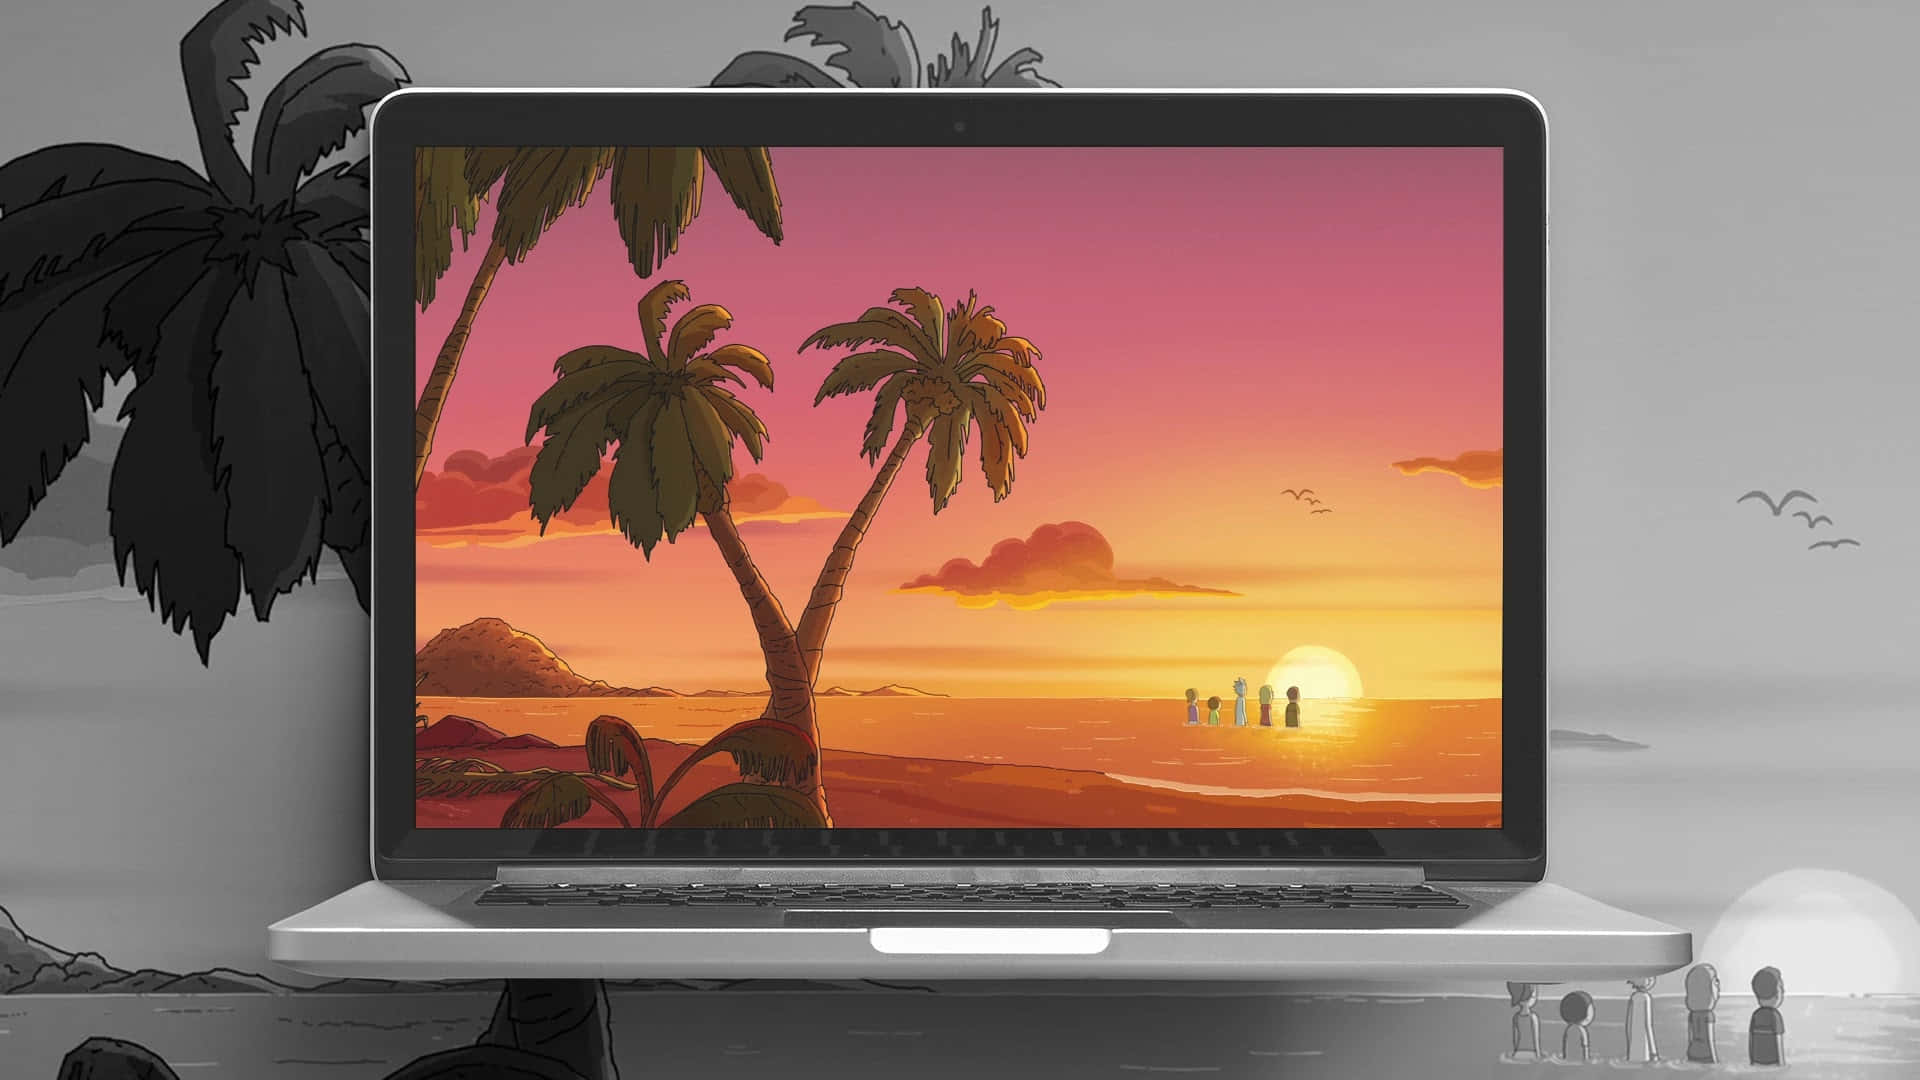 Cool off with this Rick and Morty themed laptop! Wallpaper